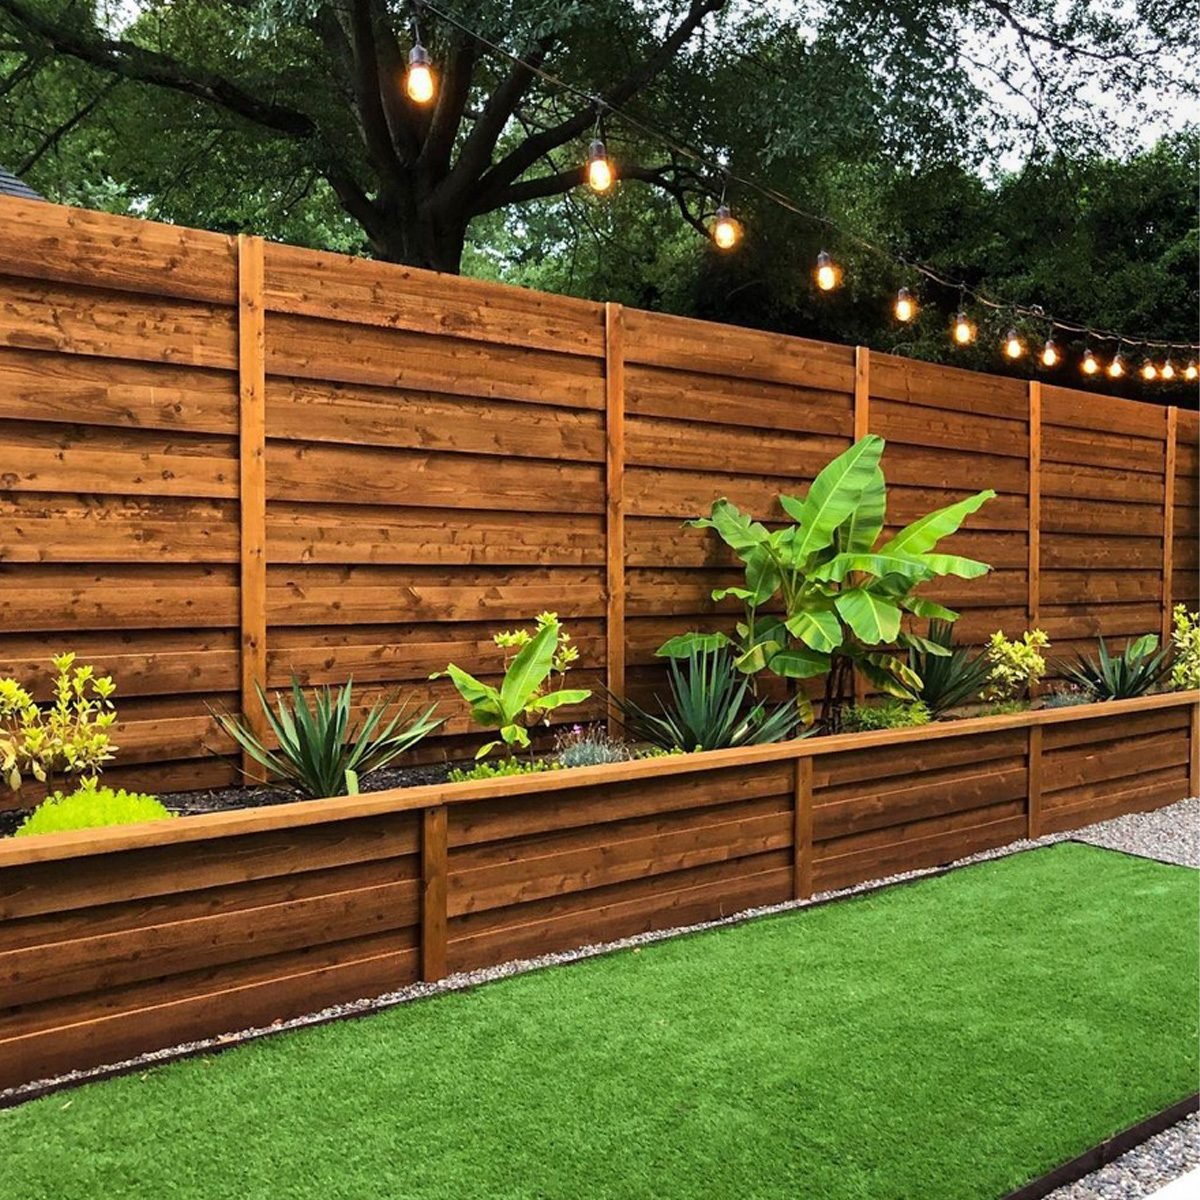 10 Inspiring Wood Fence Ideas and Designs